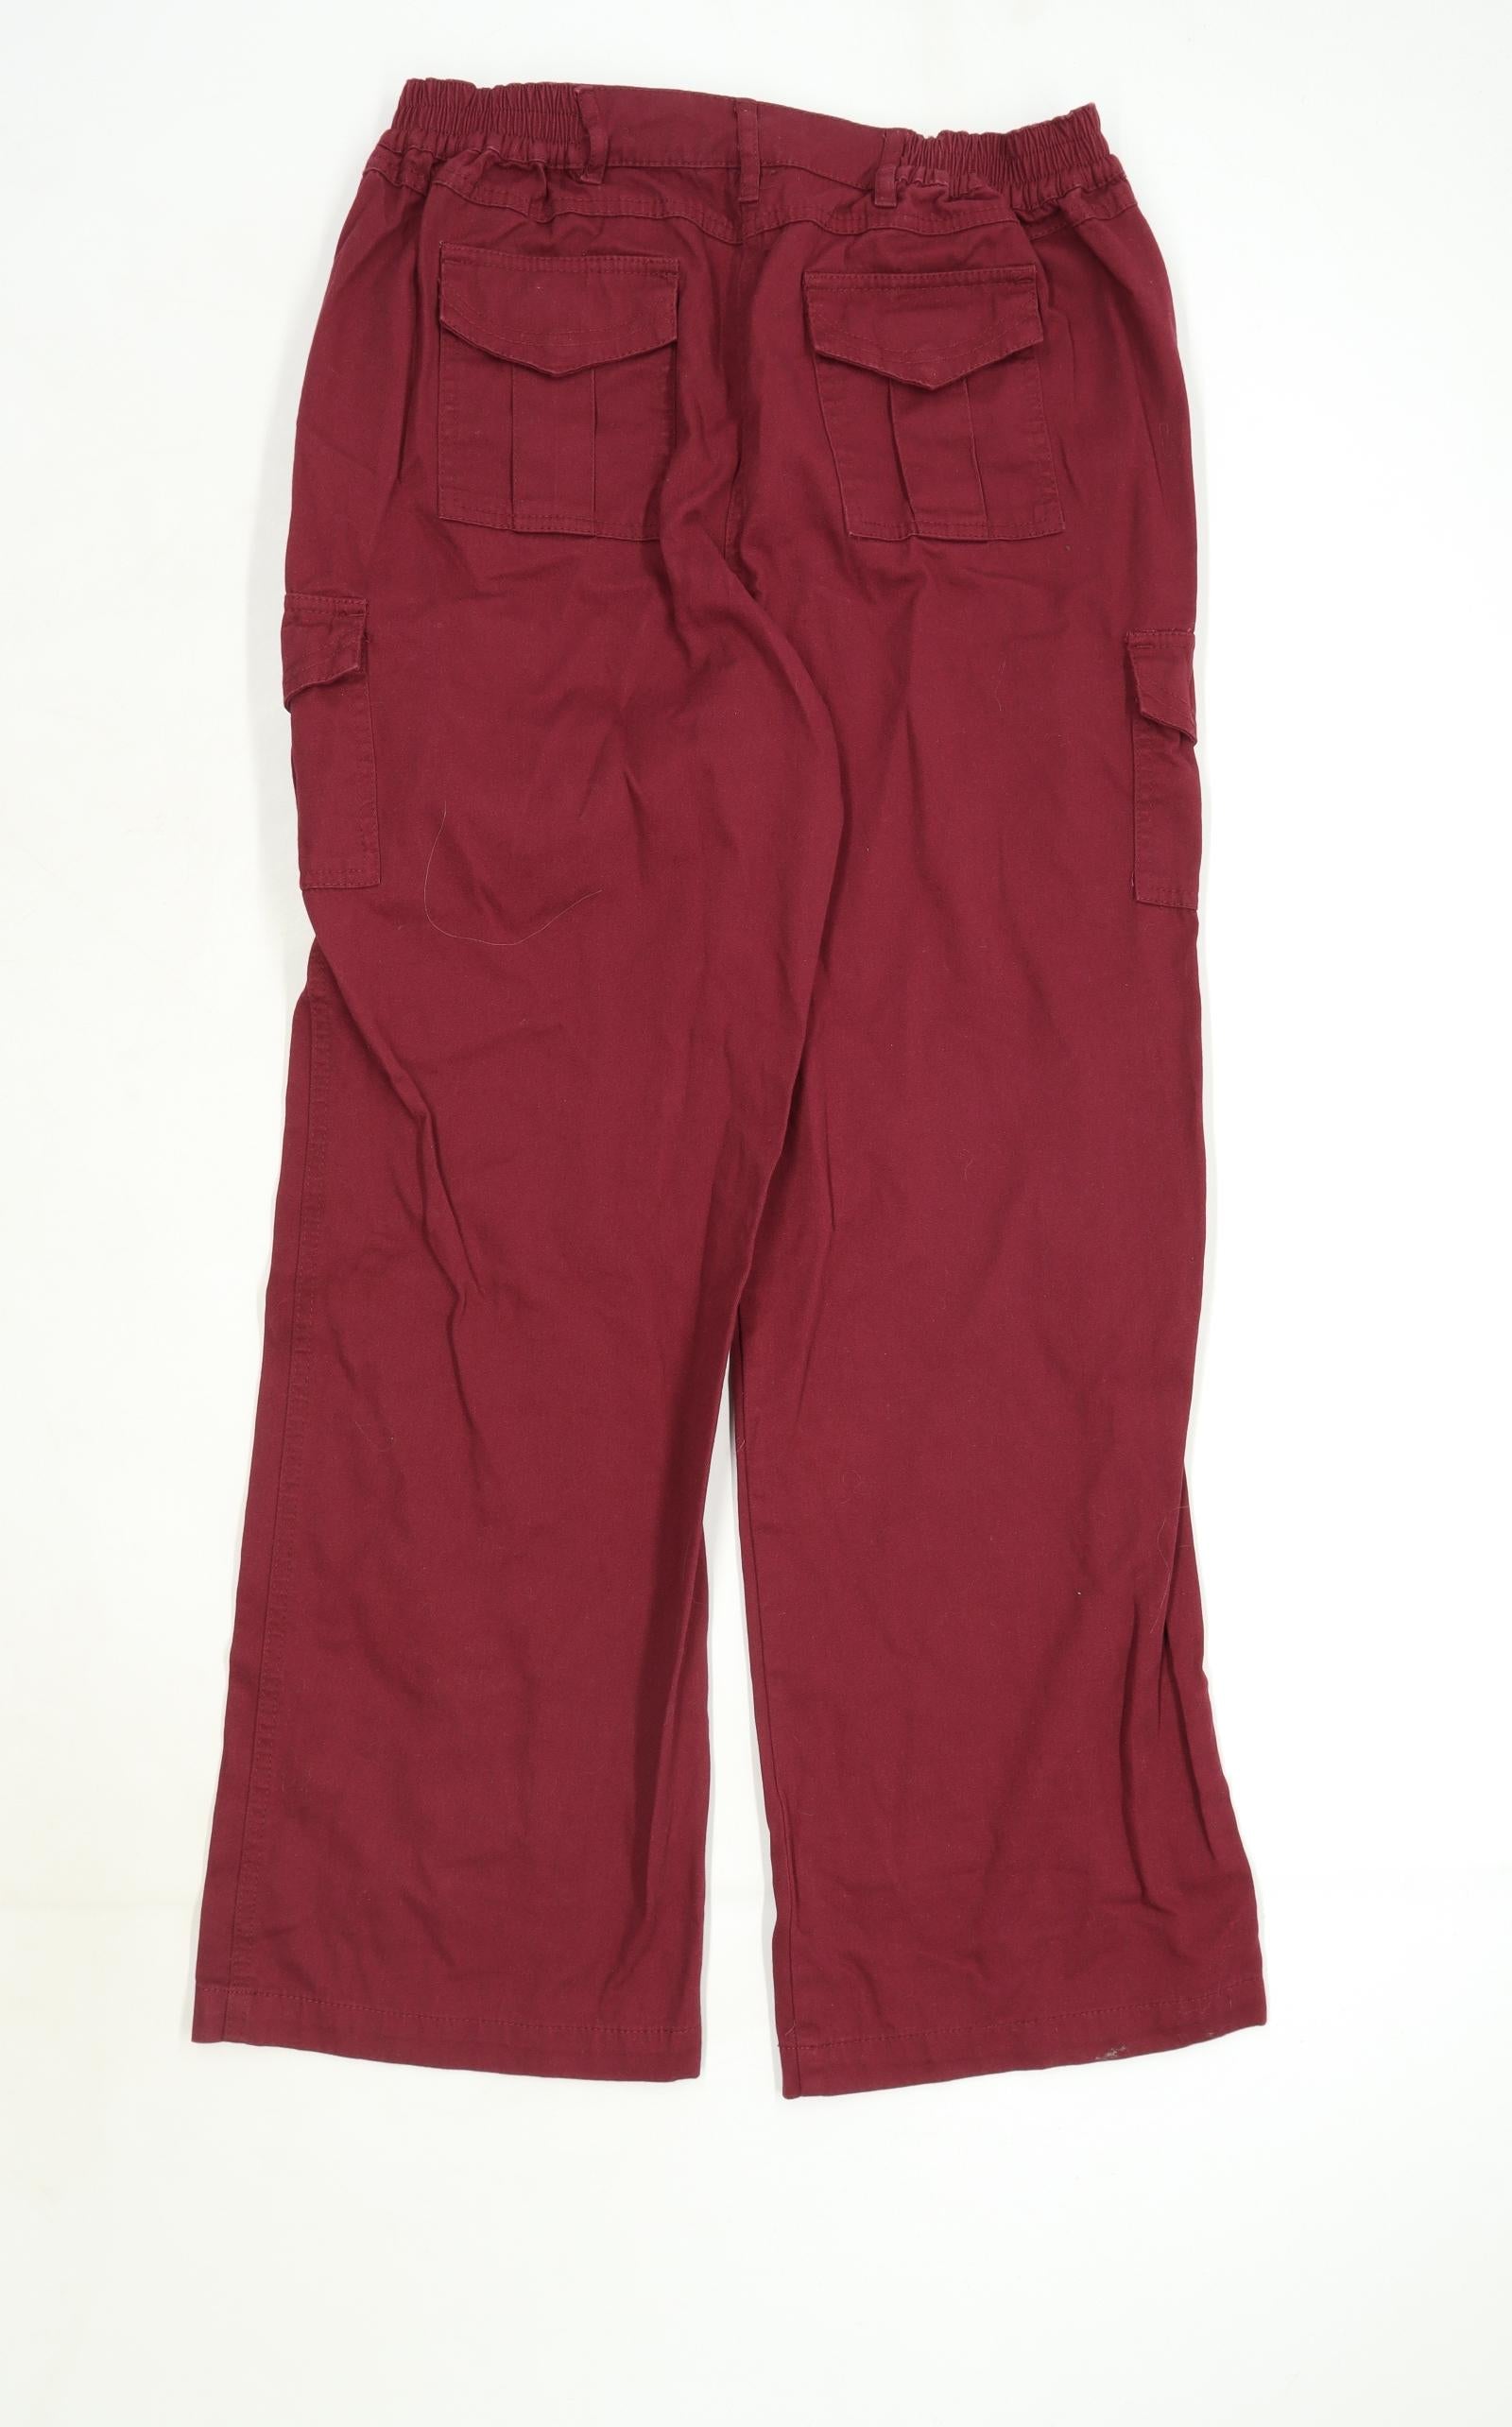 BNWT MENS COTTON TRADERS SIZE 38CROPPED CARGO TROUSERS | eBay